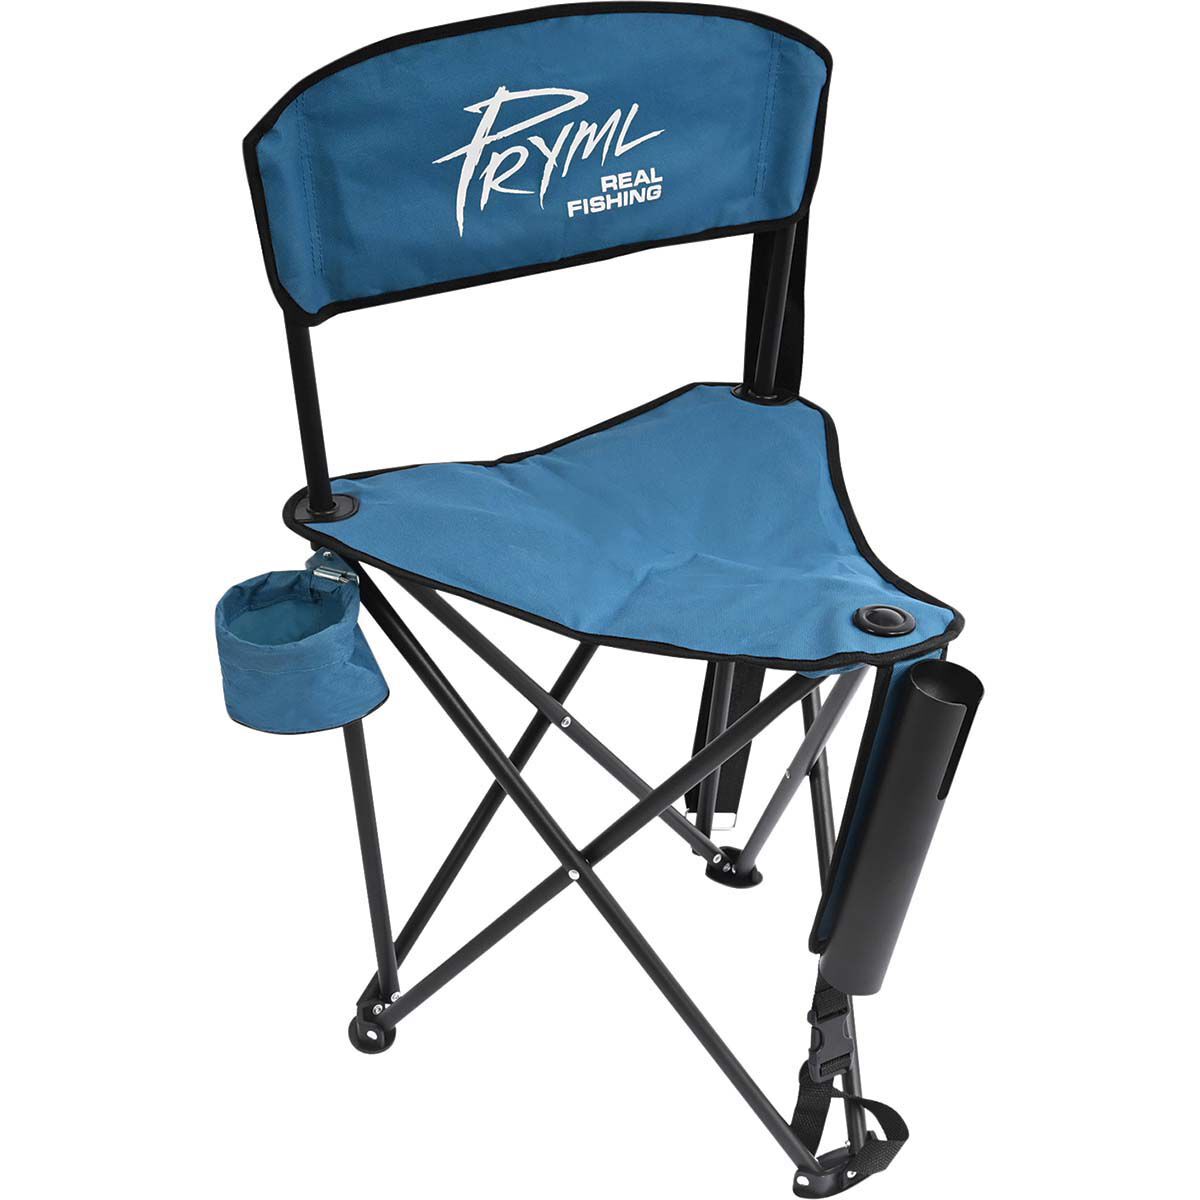 Fishing Chairs Folding with Rod Holder, Fishing Gifts for Men Open Box